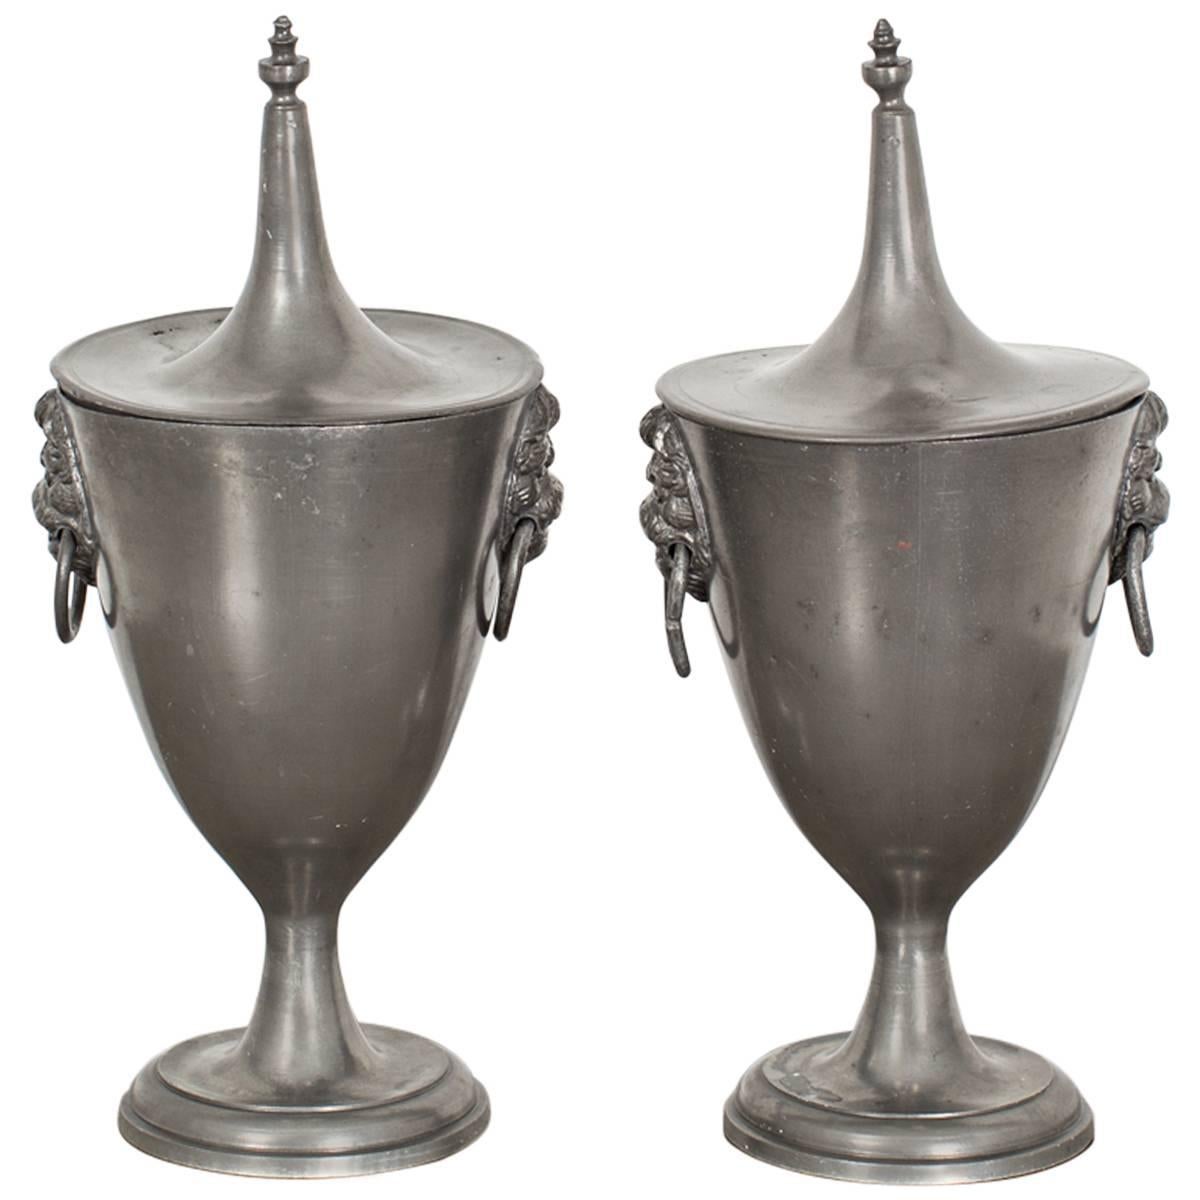 Pair of Urns Pewter Empire 19th Century, France